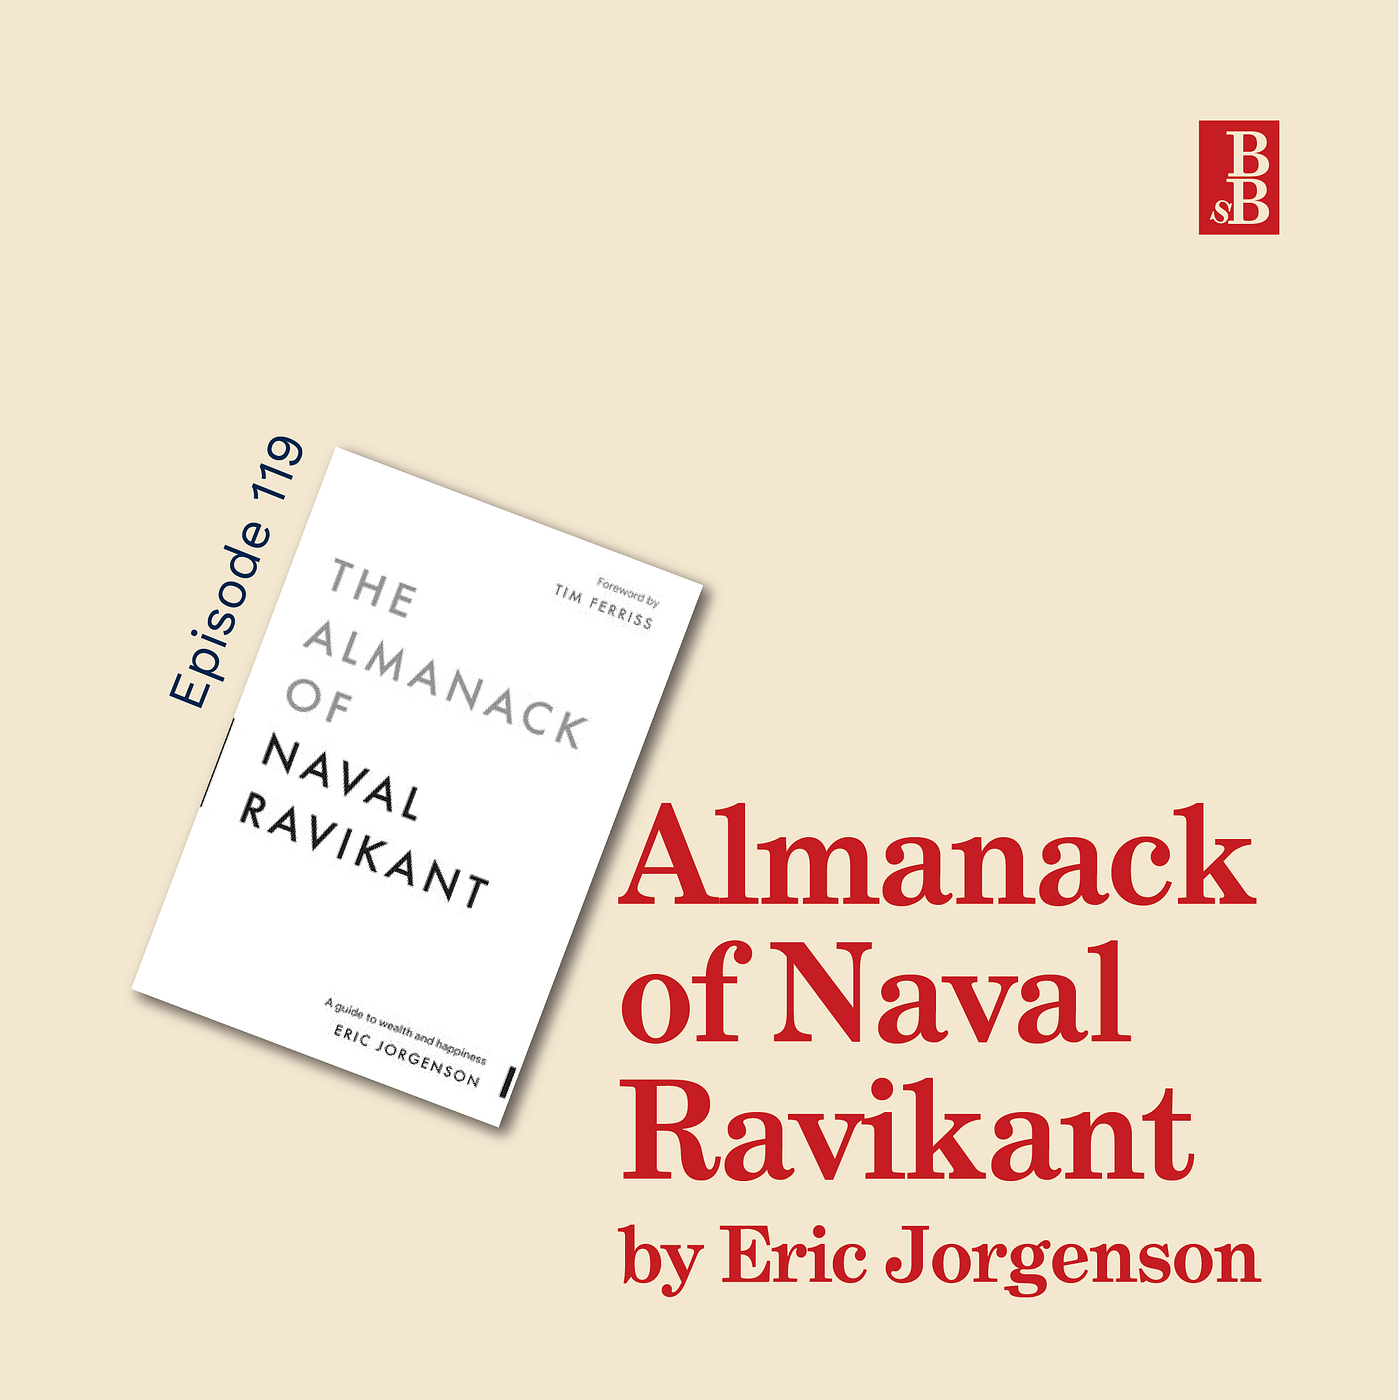 Three lessons from The Almanack of Naval Ravikant, by Eric Jorgenson, by  Steph Clarke, Steph's Business Bookshelf